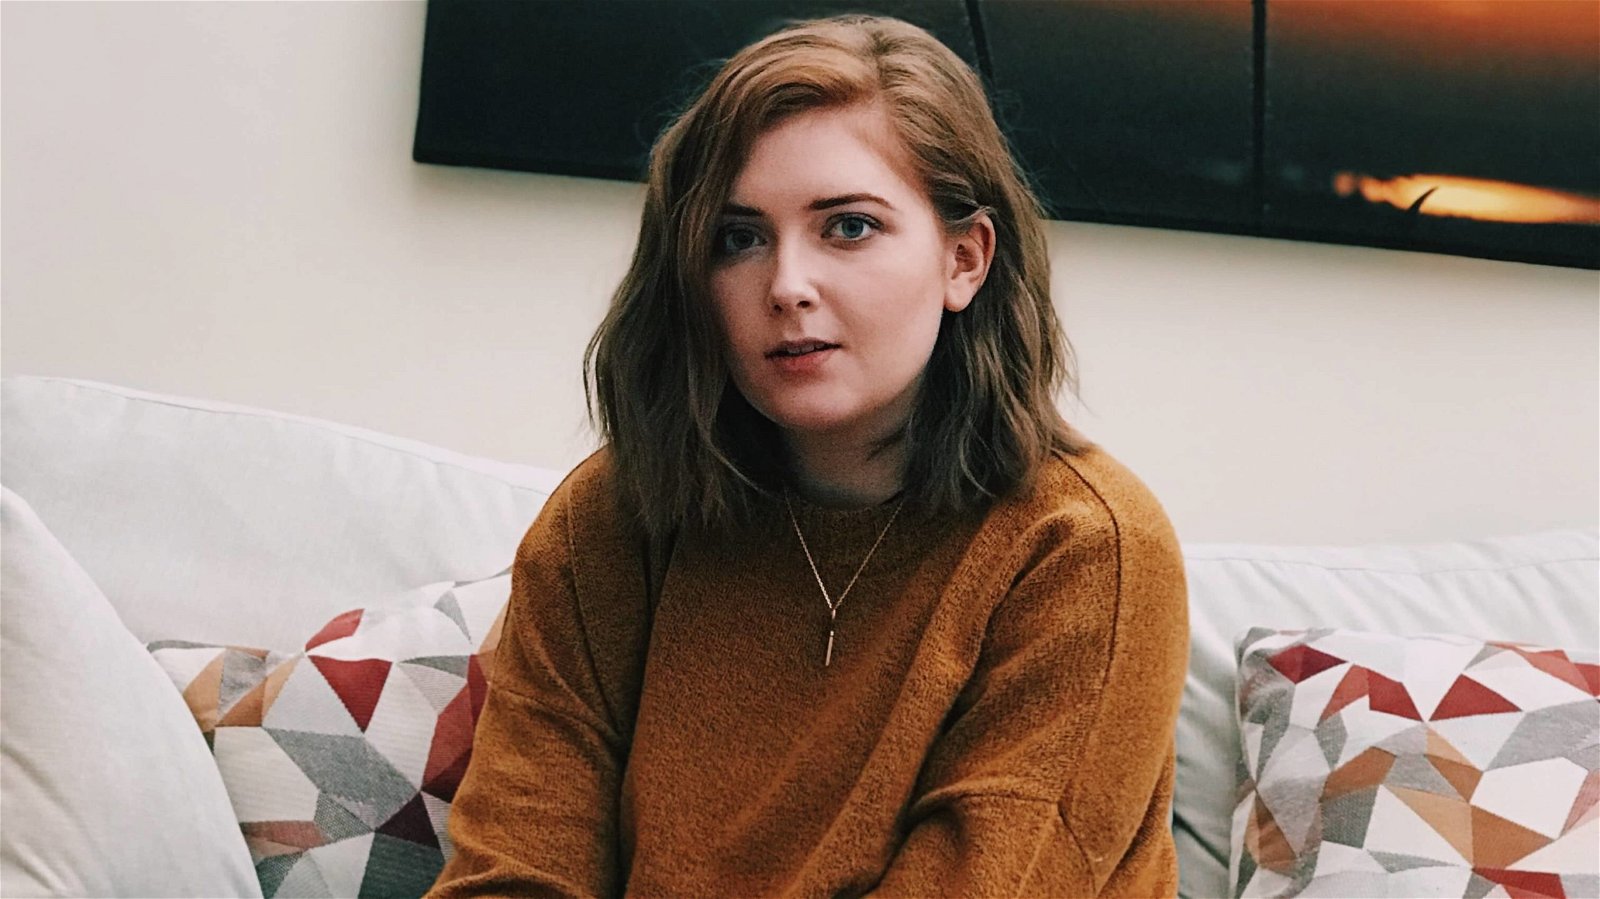 “Never in my wildest DREAMS”: Alice Oseman Stoked as ‘Heartstopper’ Books Trend Globally After the Show’s Success